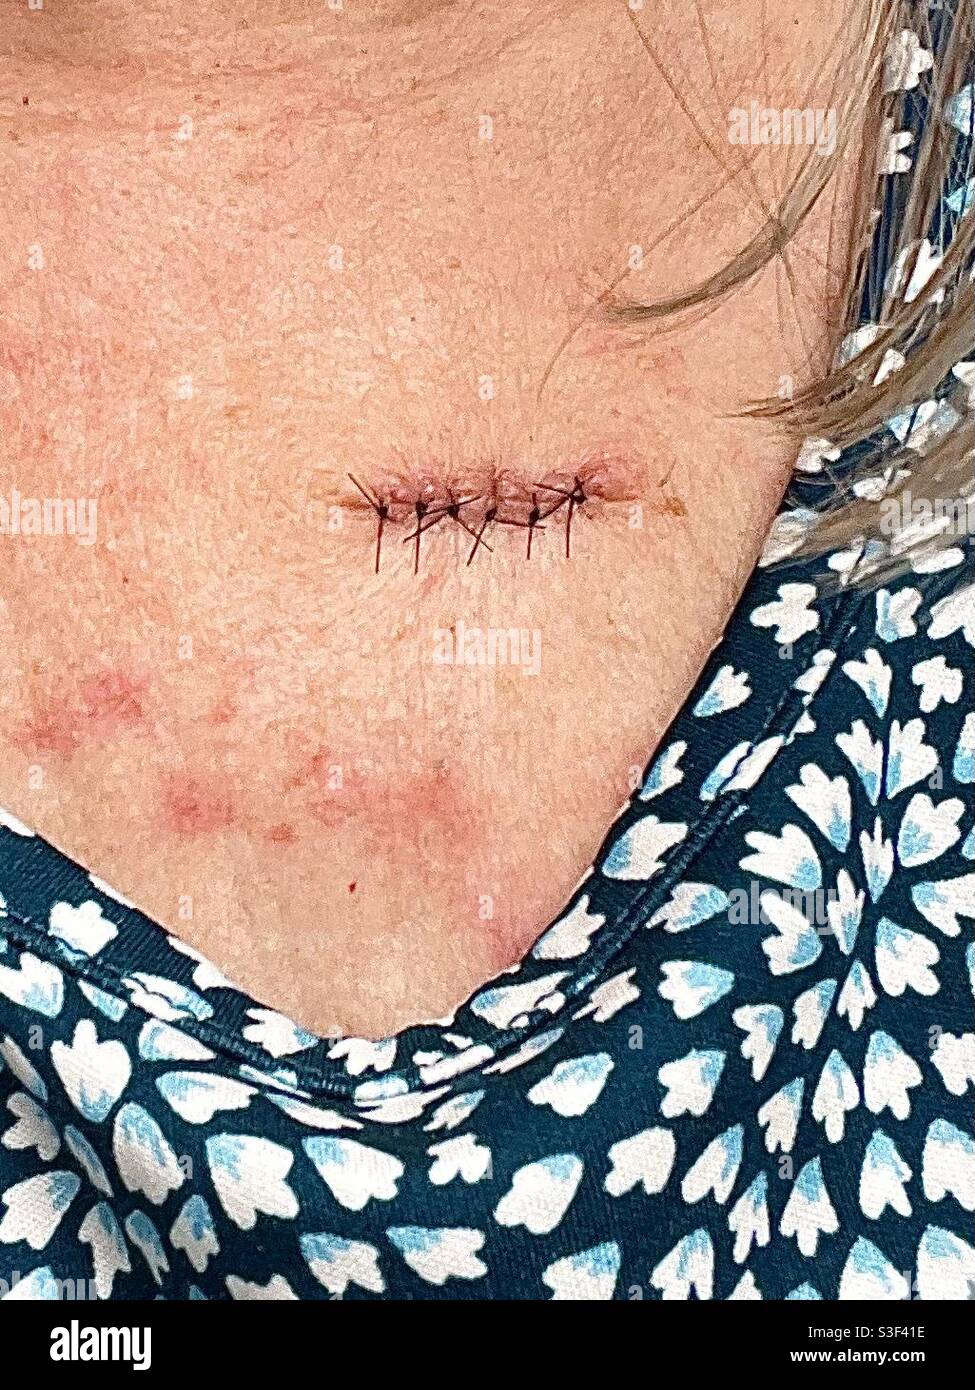 Close up of stitches after medical procedure Stock Photo